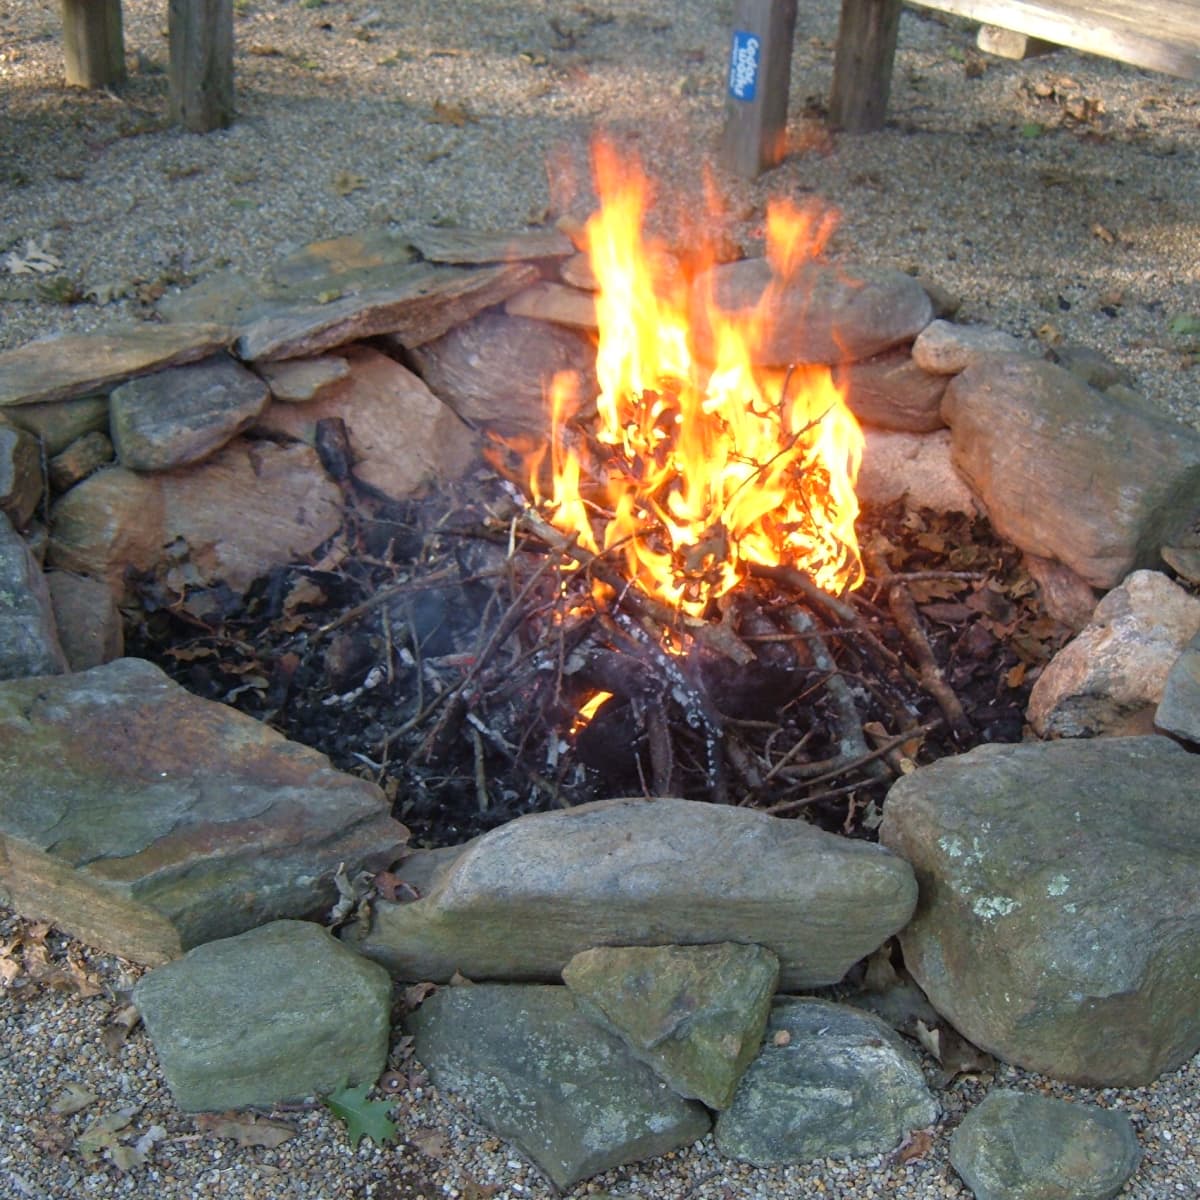 How To Build A Fieldstone Fire Pit, Heat Resistant Stone For Fire Pit